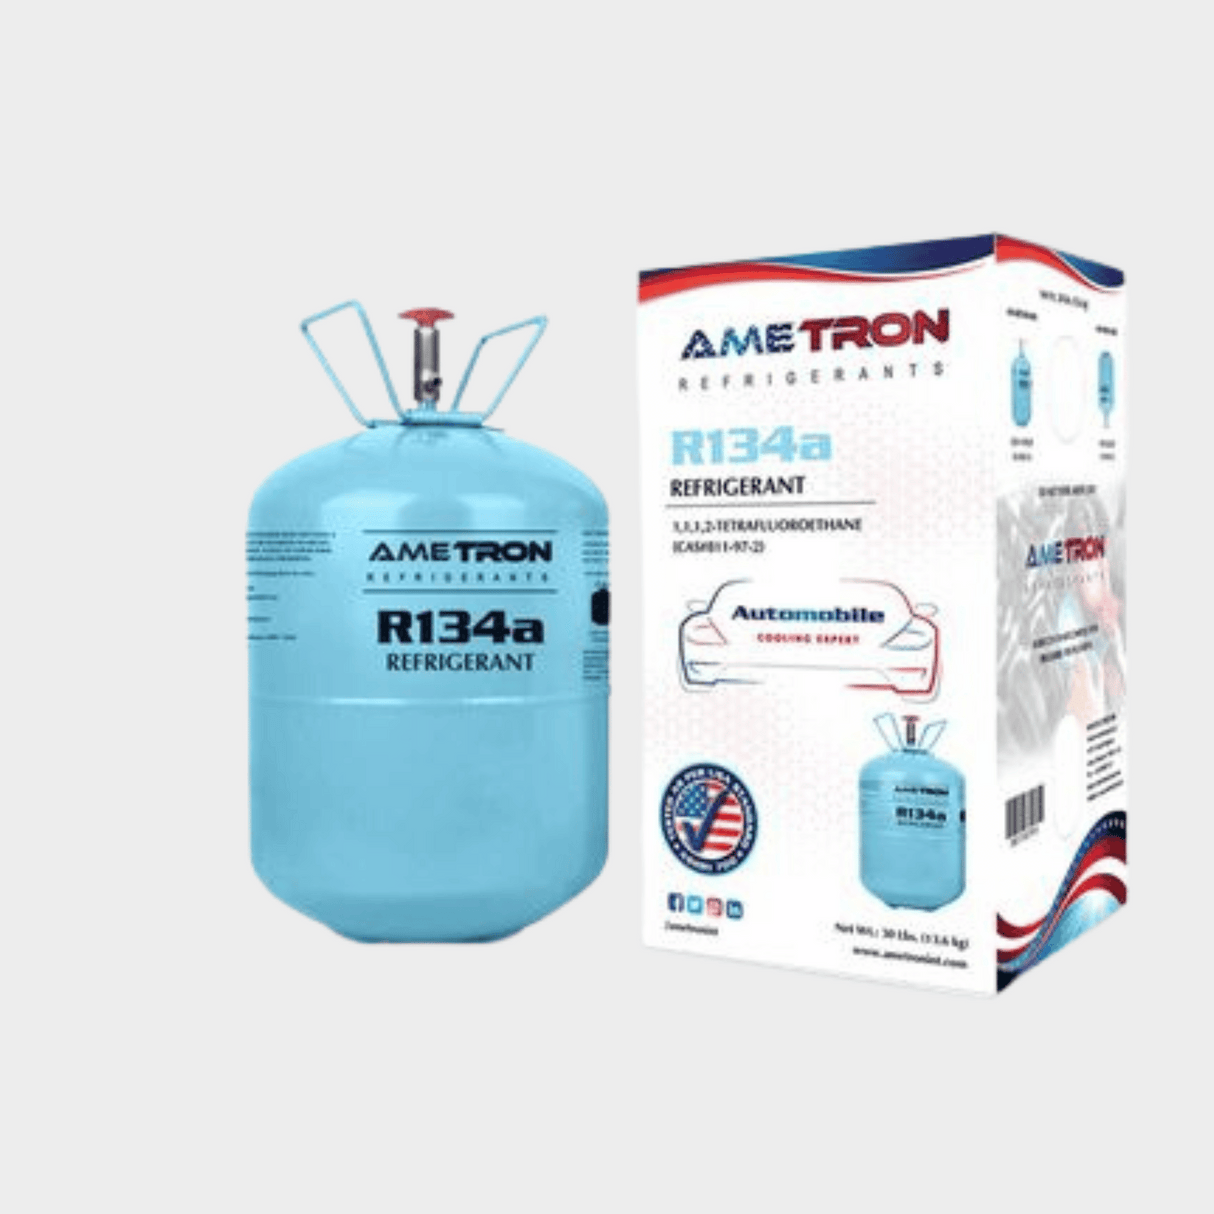 Samsung R410A Refrigerant Gas - 11.3kg Disposable Cylinder for Air Conditioning